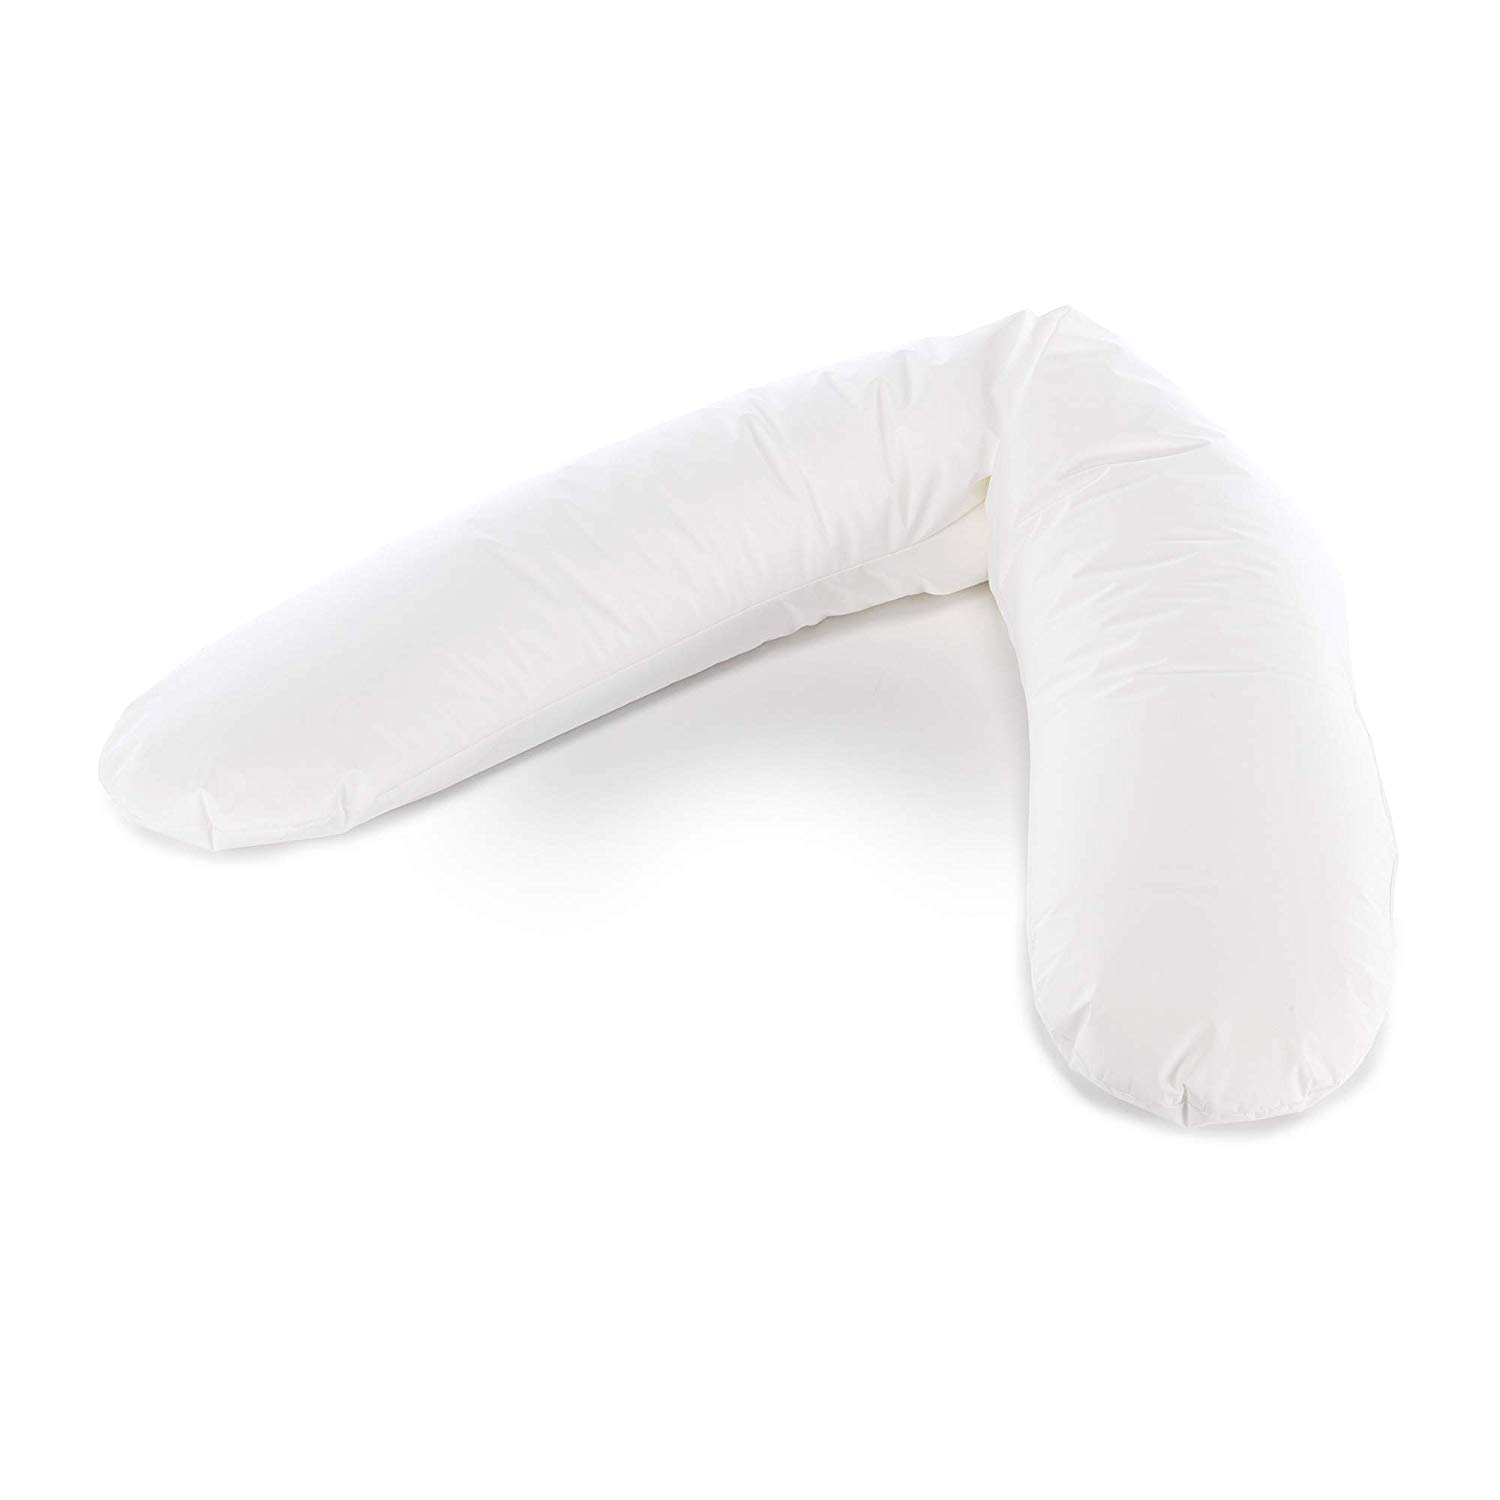 Theraline The original nursing pillow with micro bead filling including jersey cover, 20 white